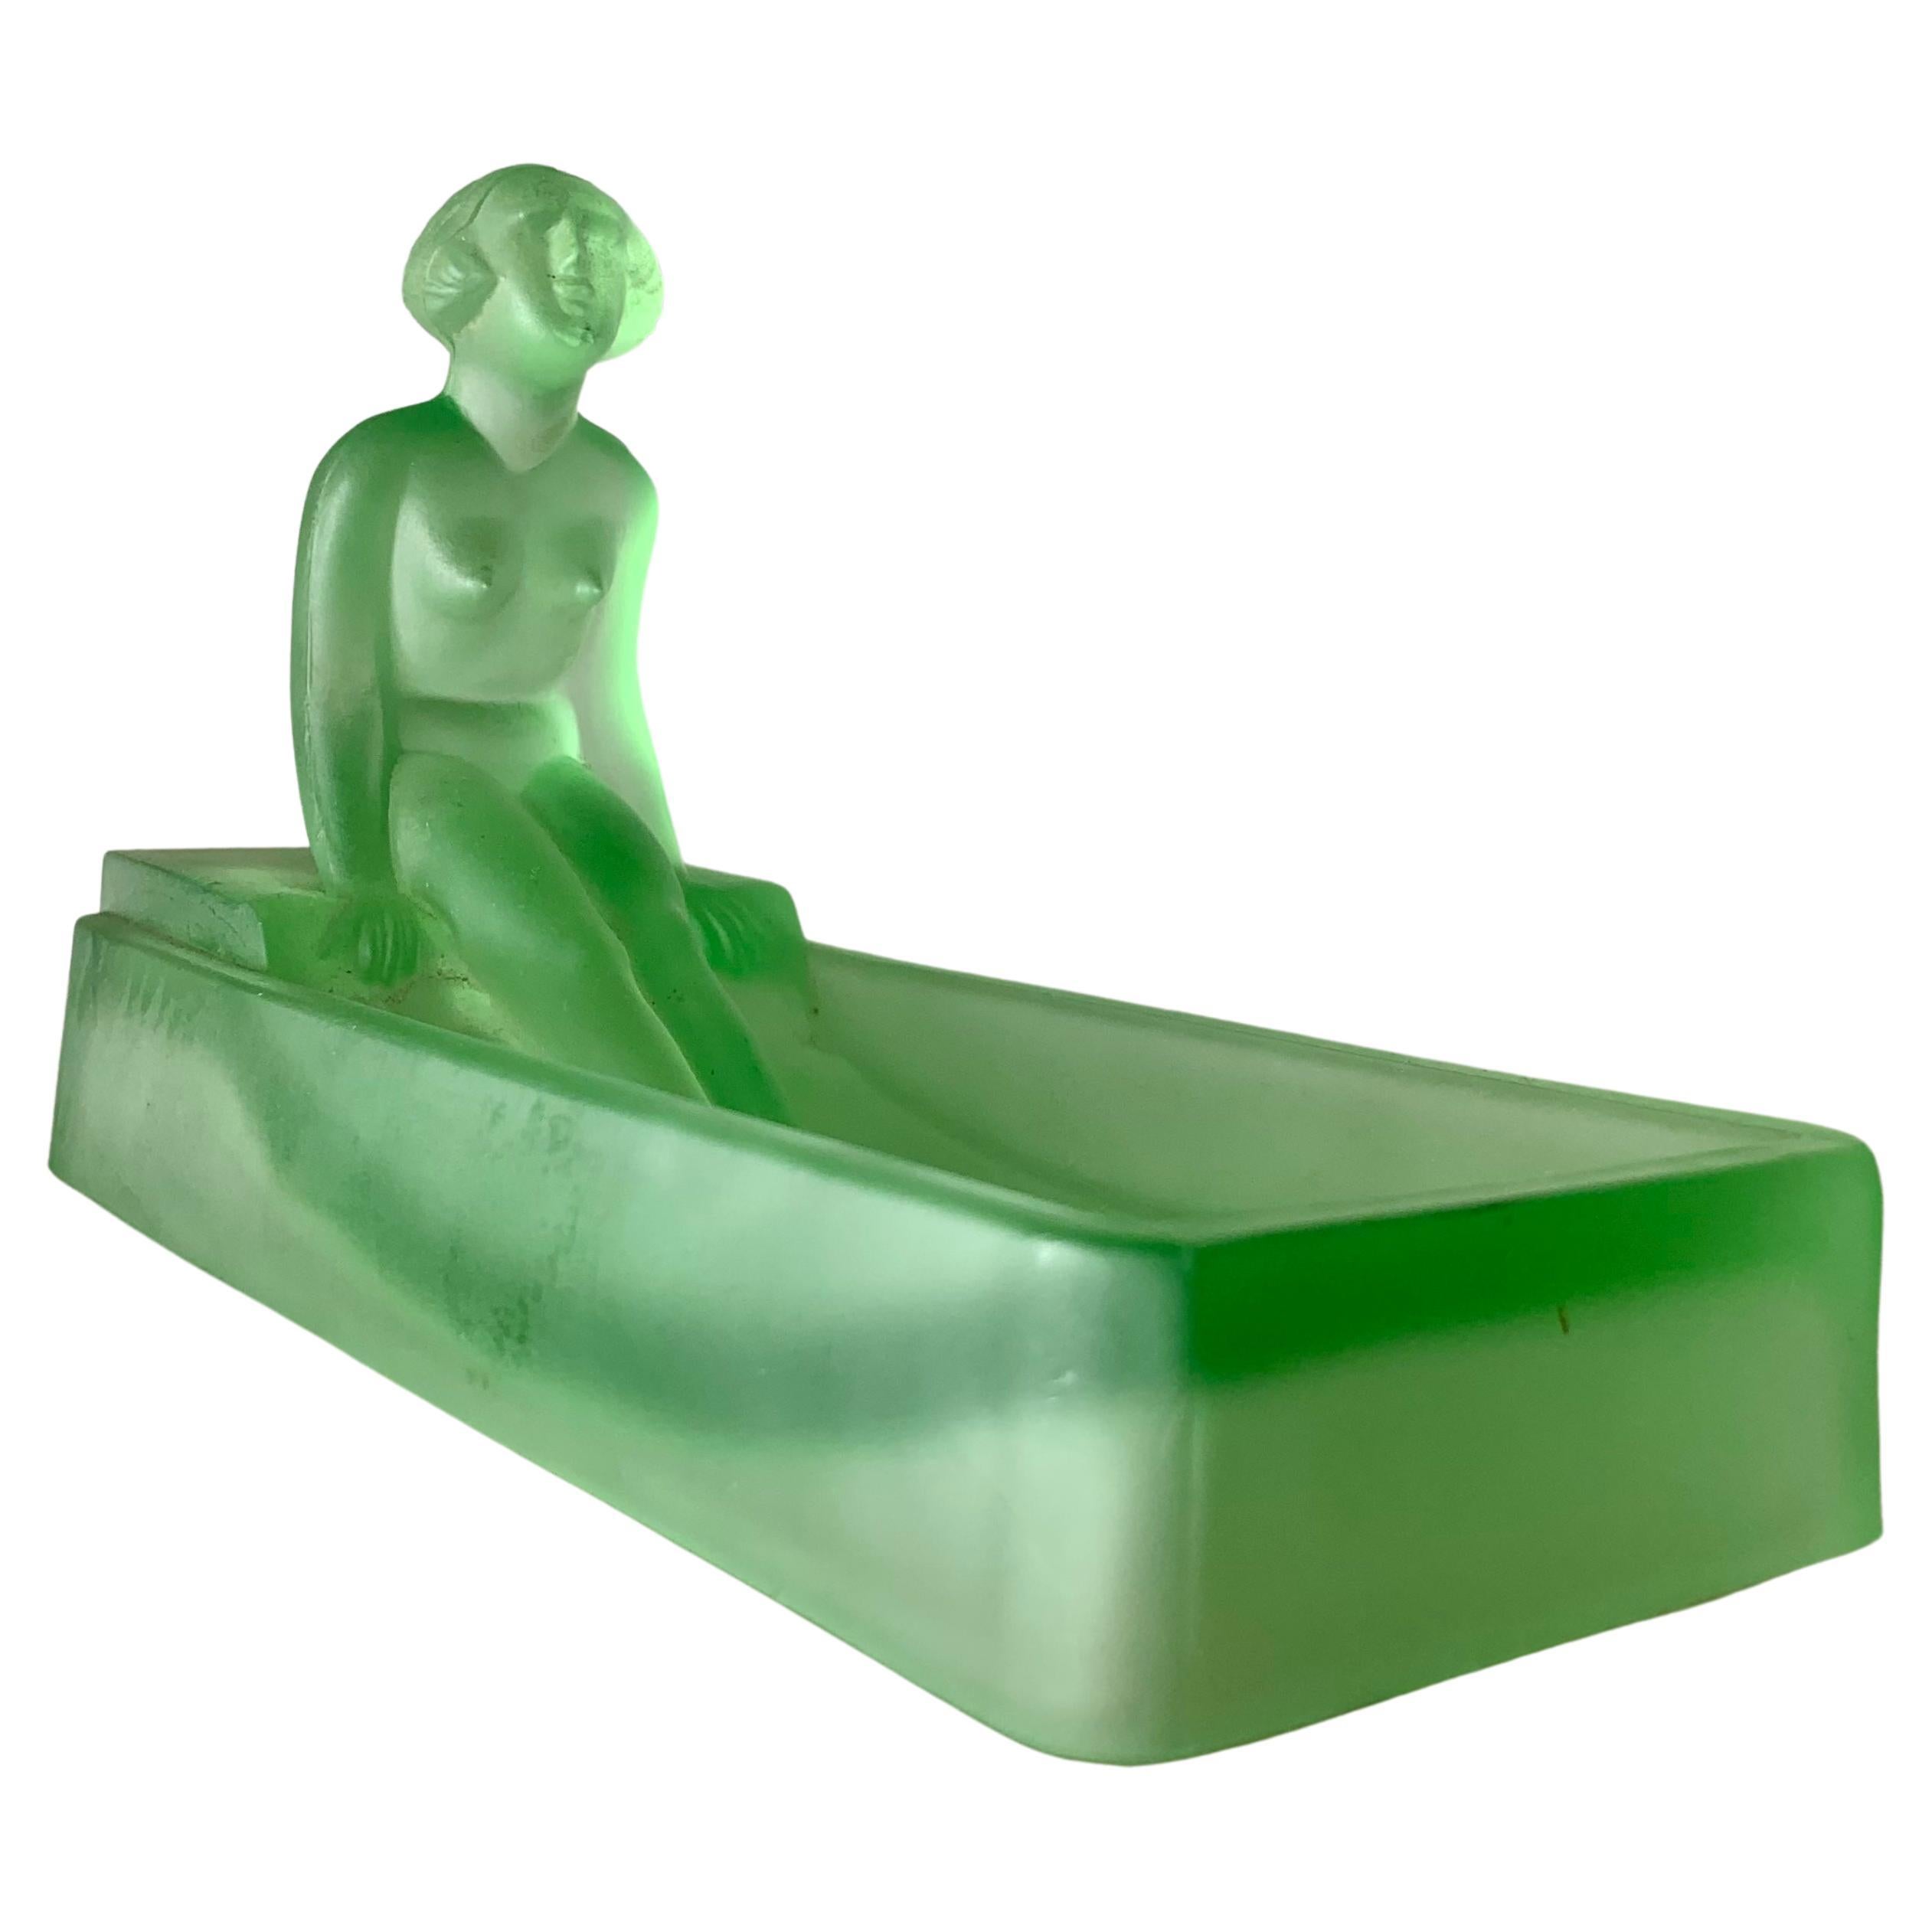  Art Deco Green Frosted Depression Glass Vide-Poche with Nude Lady, 1981